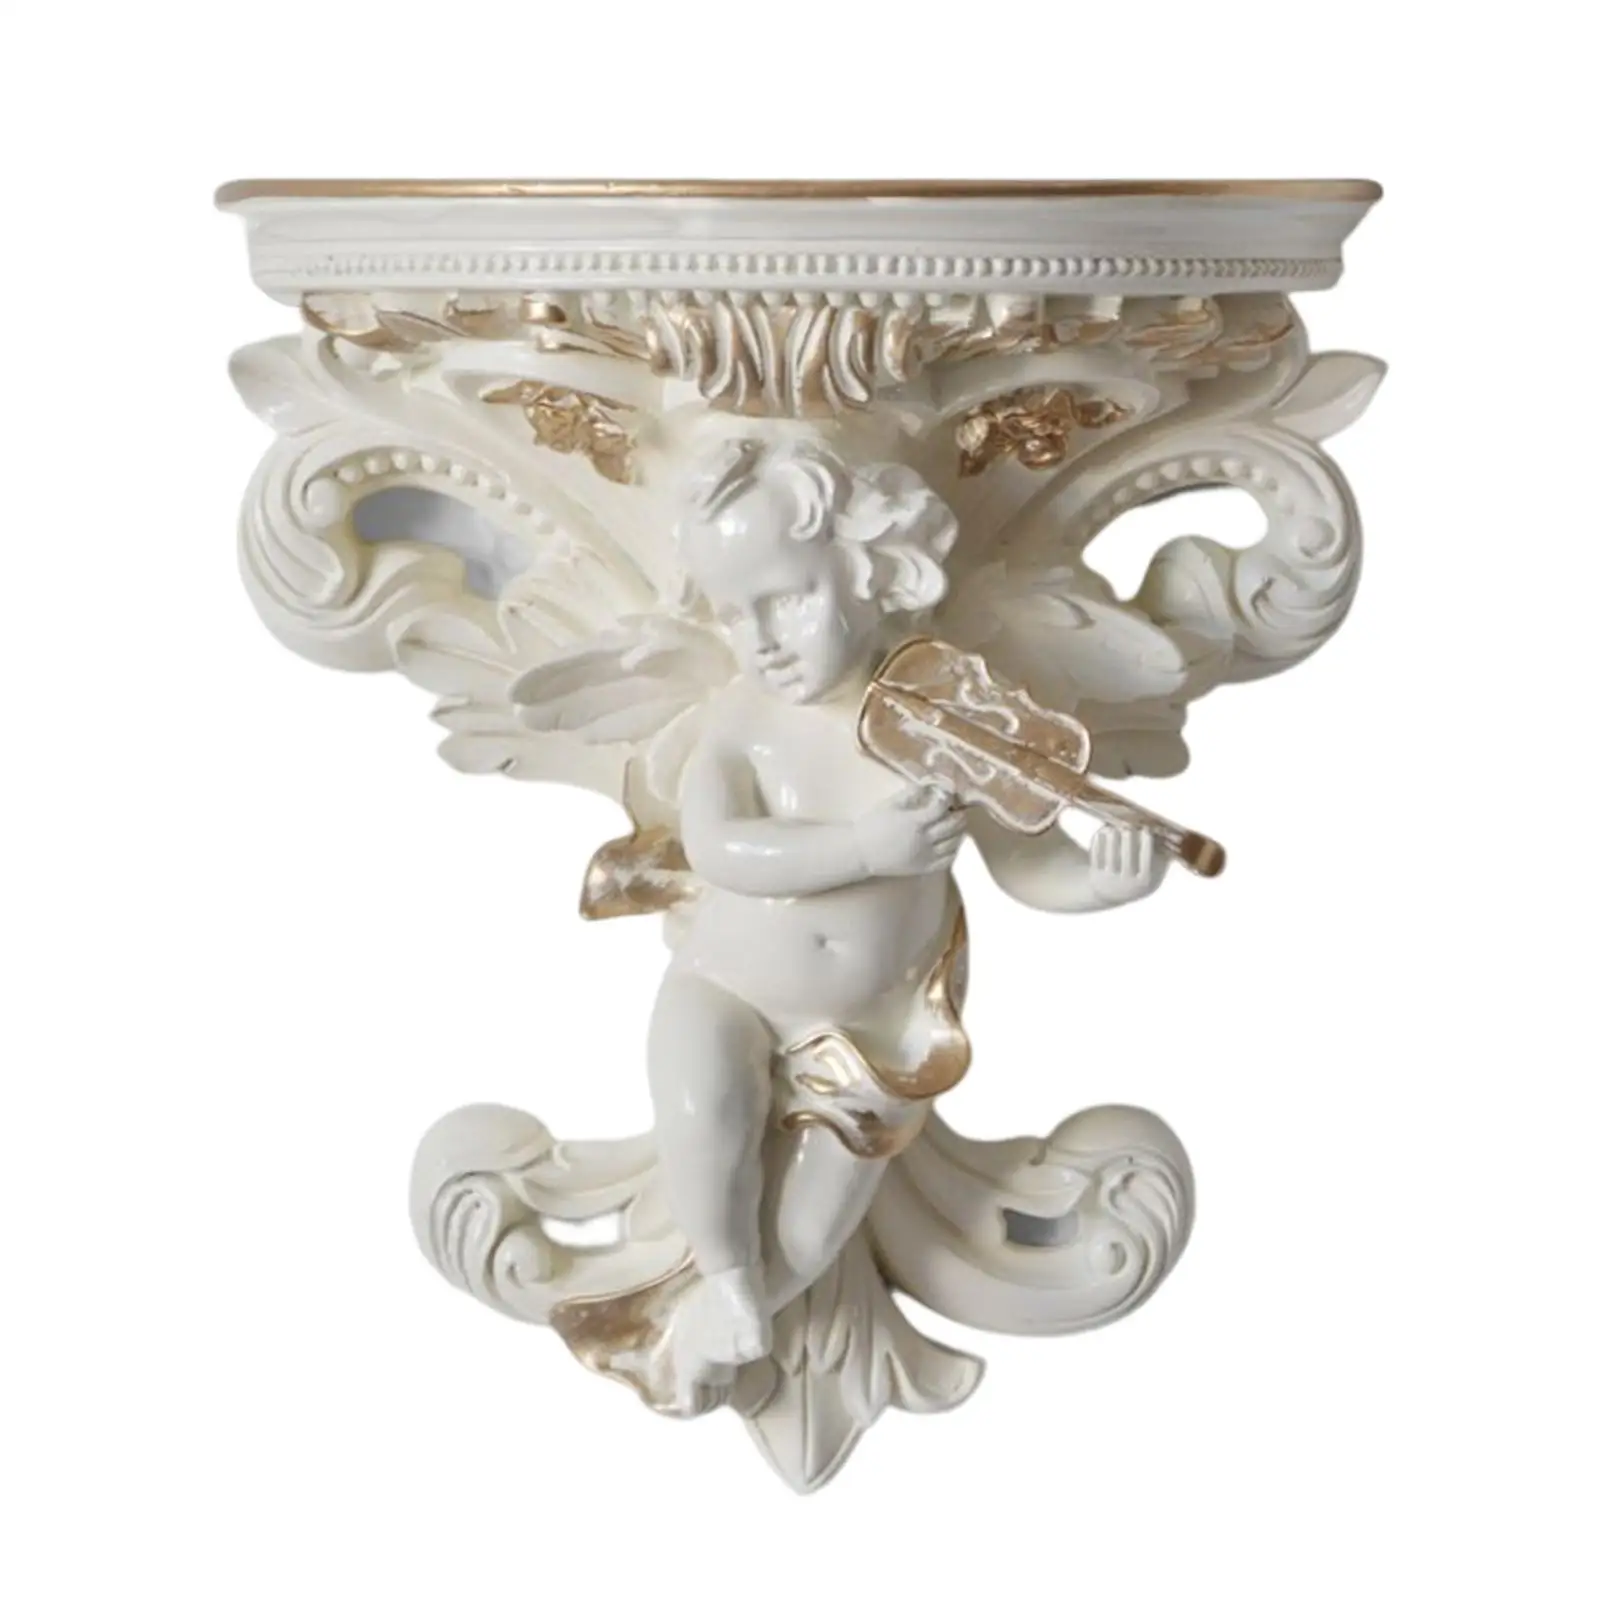 Decorative Wall Floating Shelf Angel Statue Wall Mount Resin Holder for Background Home Decor Bathroom Storage Wall Decoration